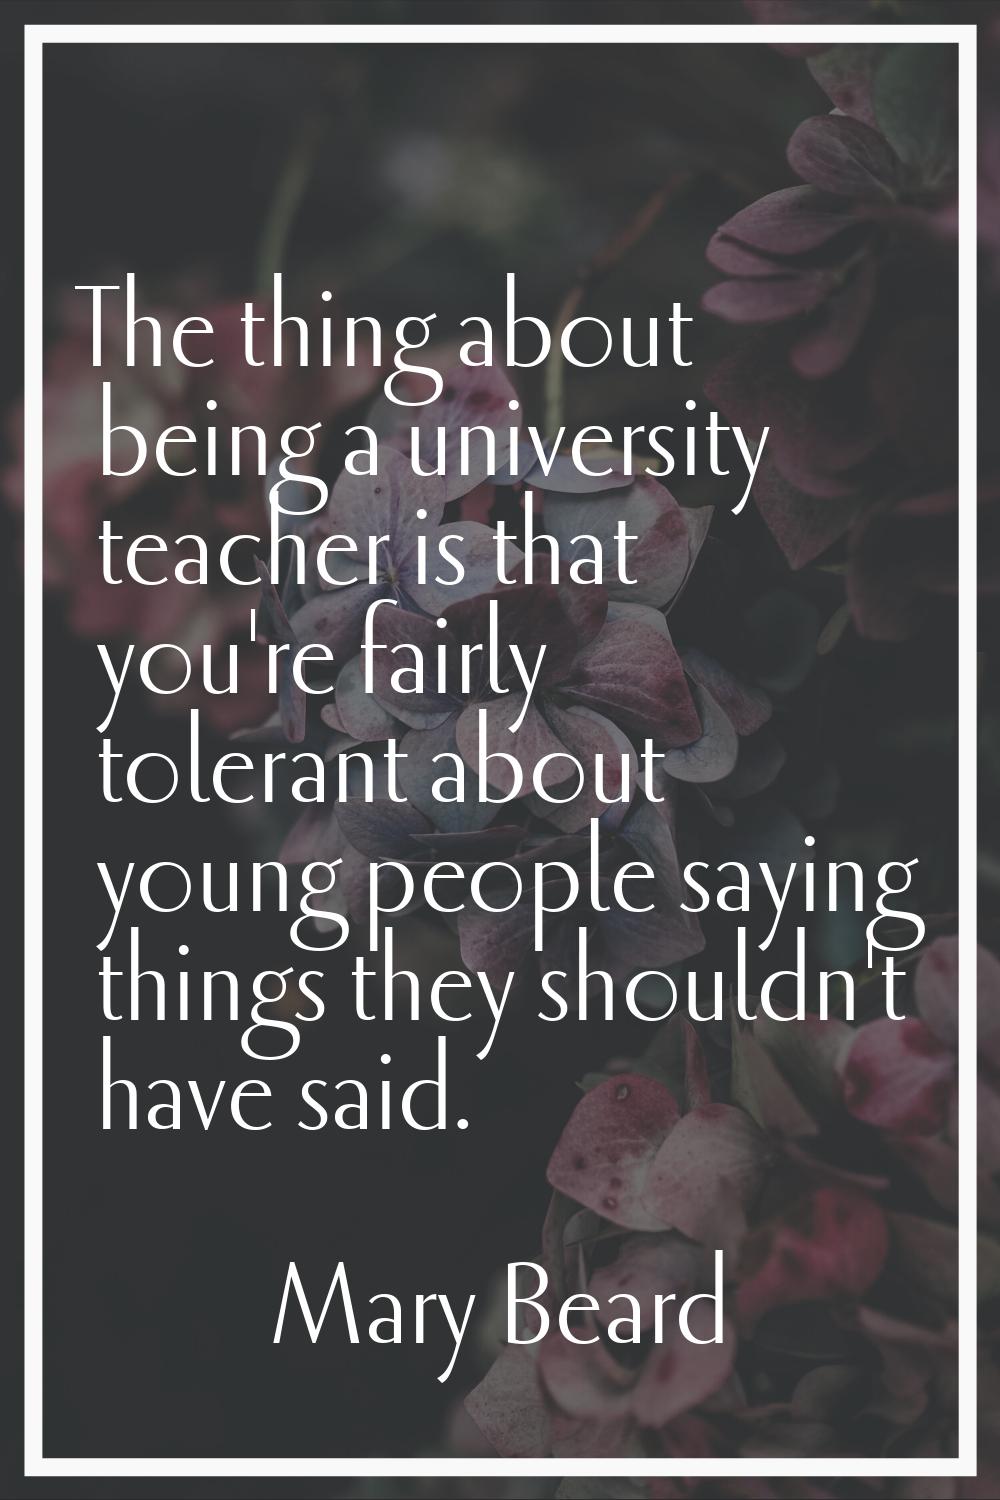 The thing about being a university teacher is that you're fairly tolerant about young people saying